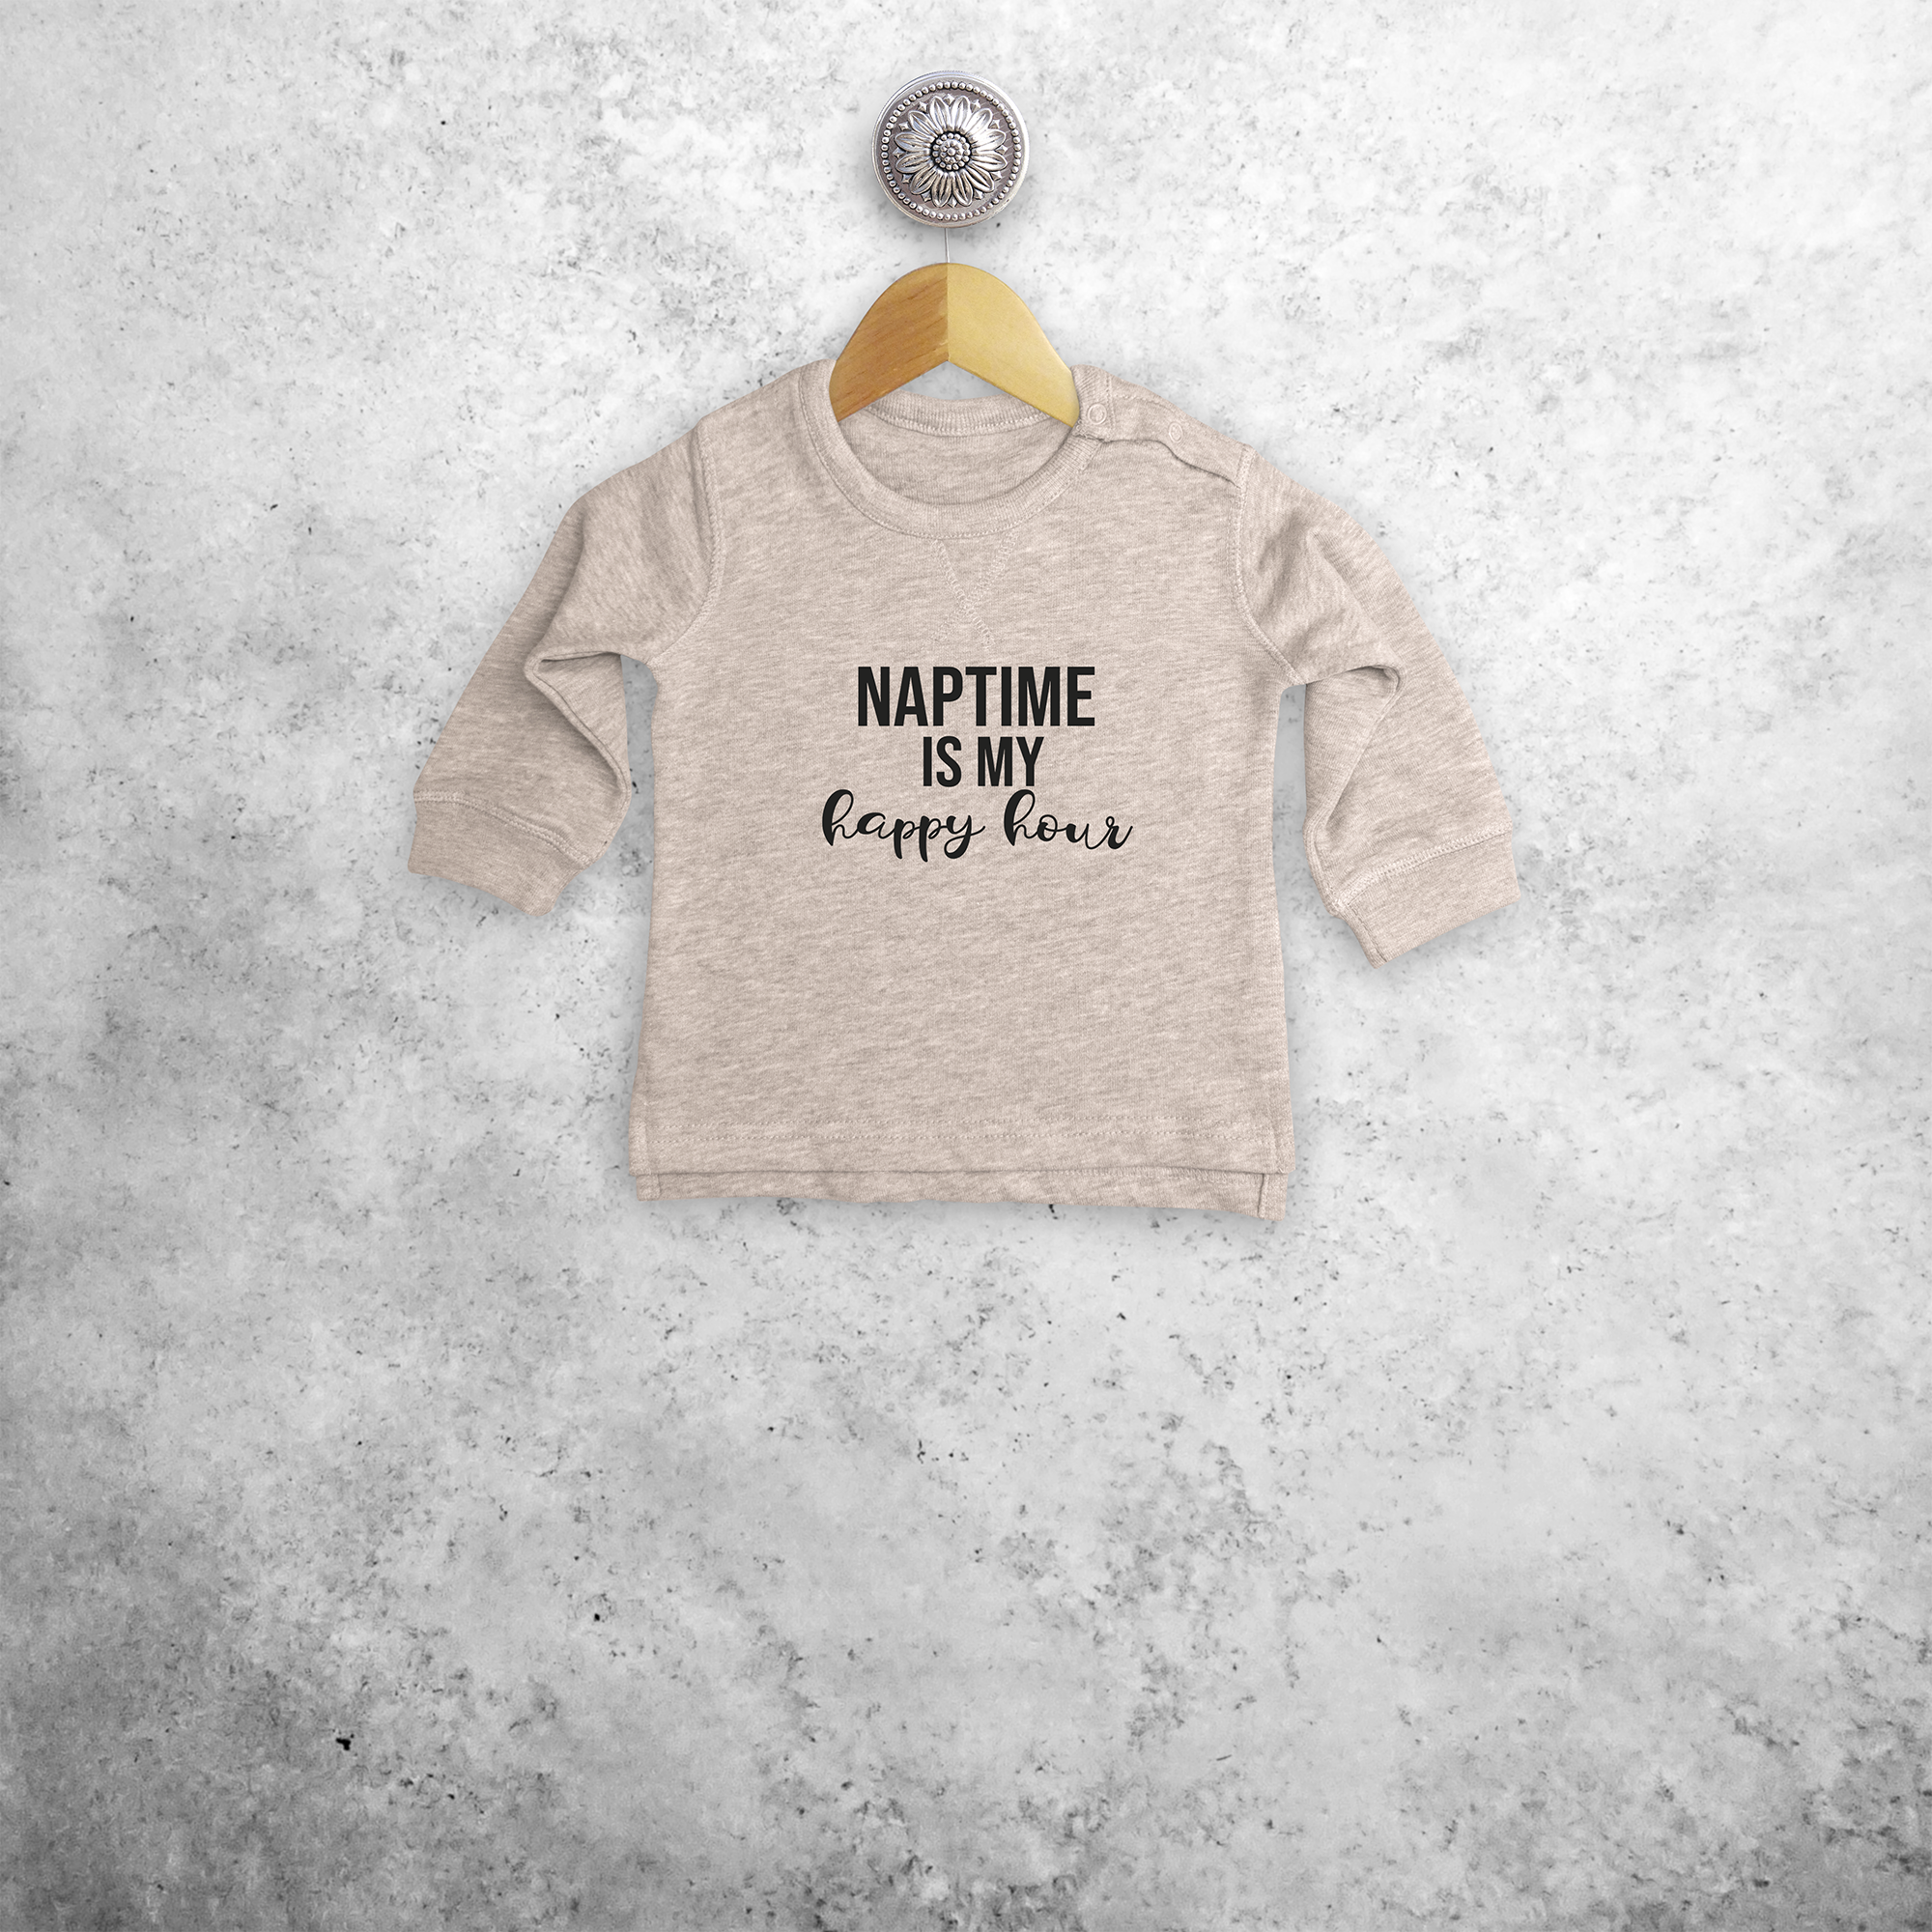 'Naptime is my happy hour' baby sweater